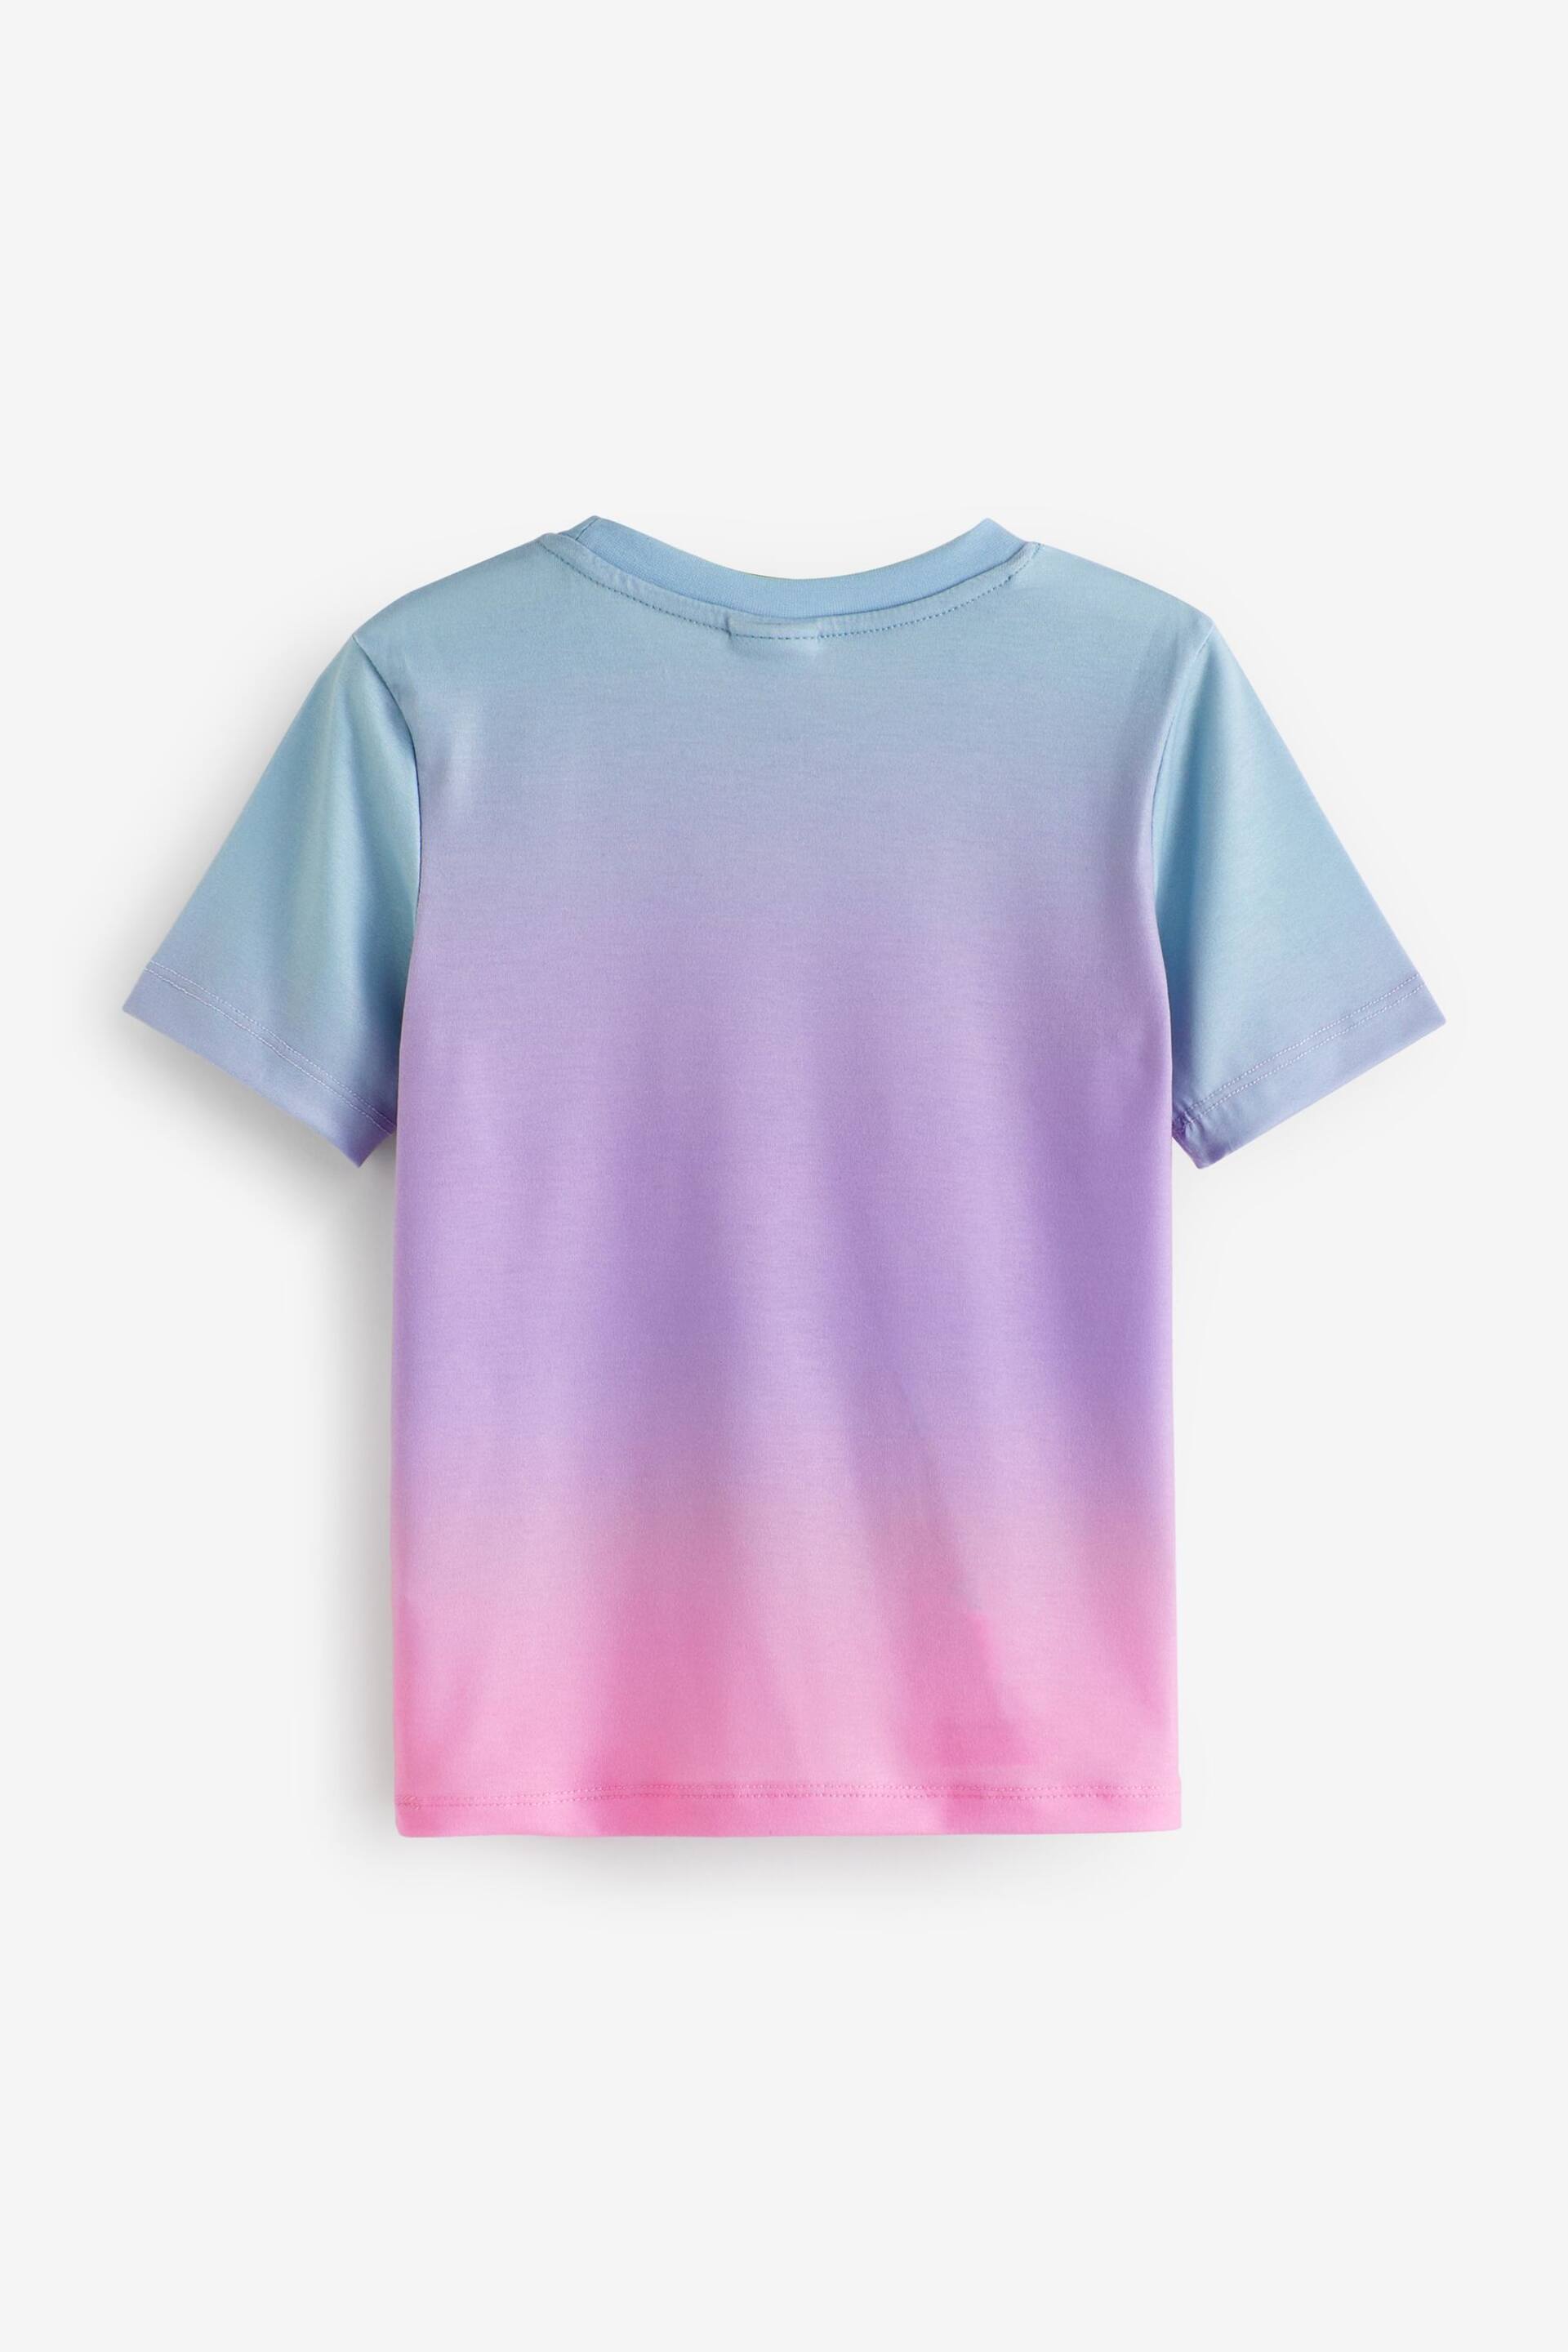 Hype. Kids Pink Fade T-Shirt - Image 6 of 7